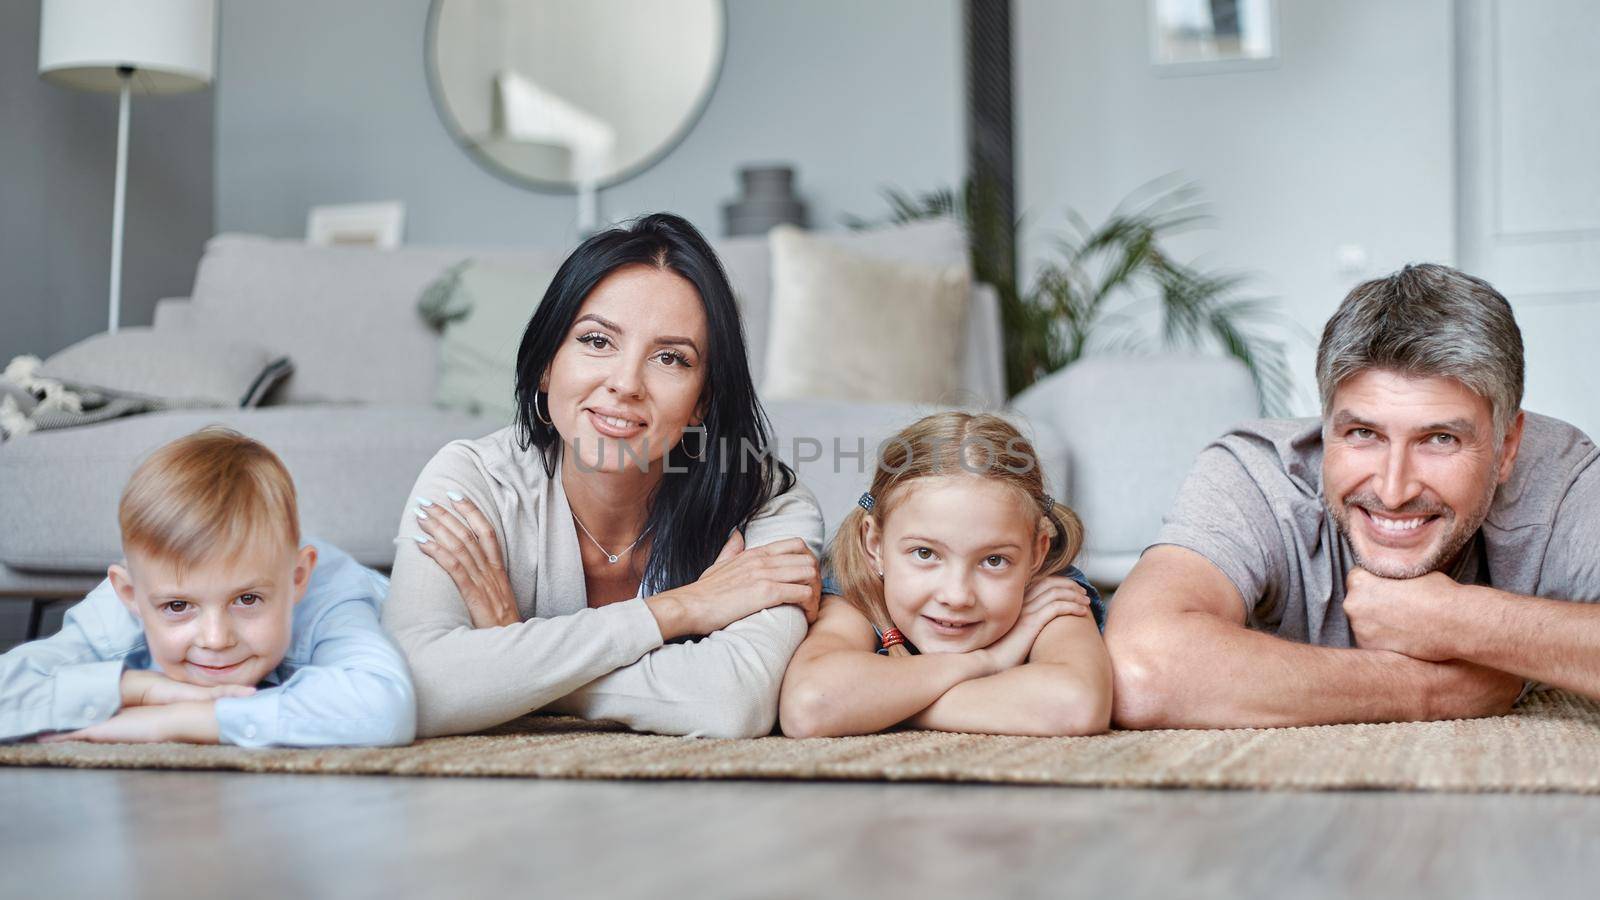 happy family with children lying on the floor in the living room. photo with a copy space.